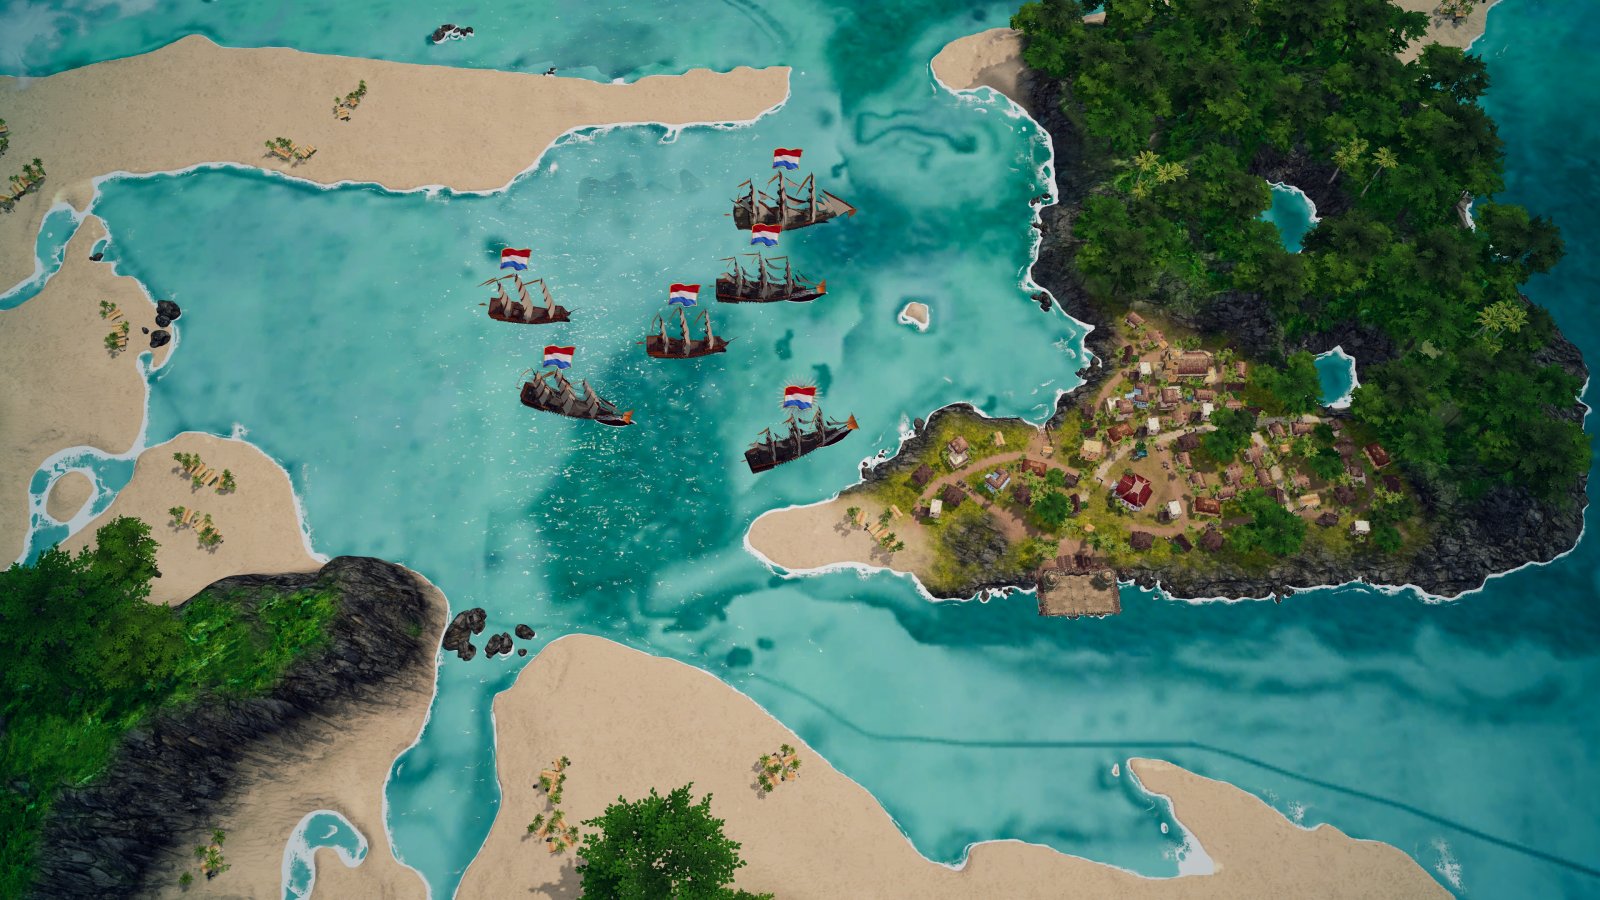 Corsairs – Battle of the Caribbean annunciato per PC, PlayStation, Xbox e Switch